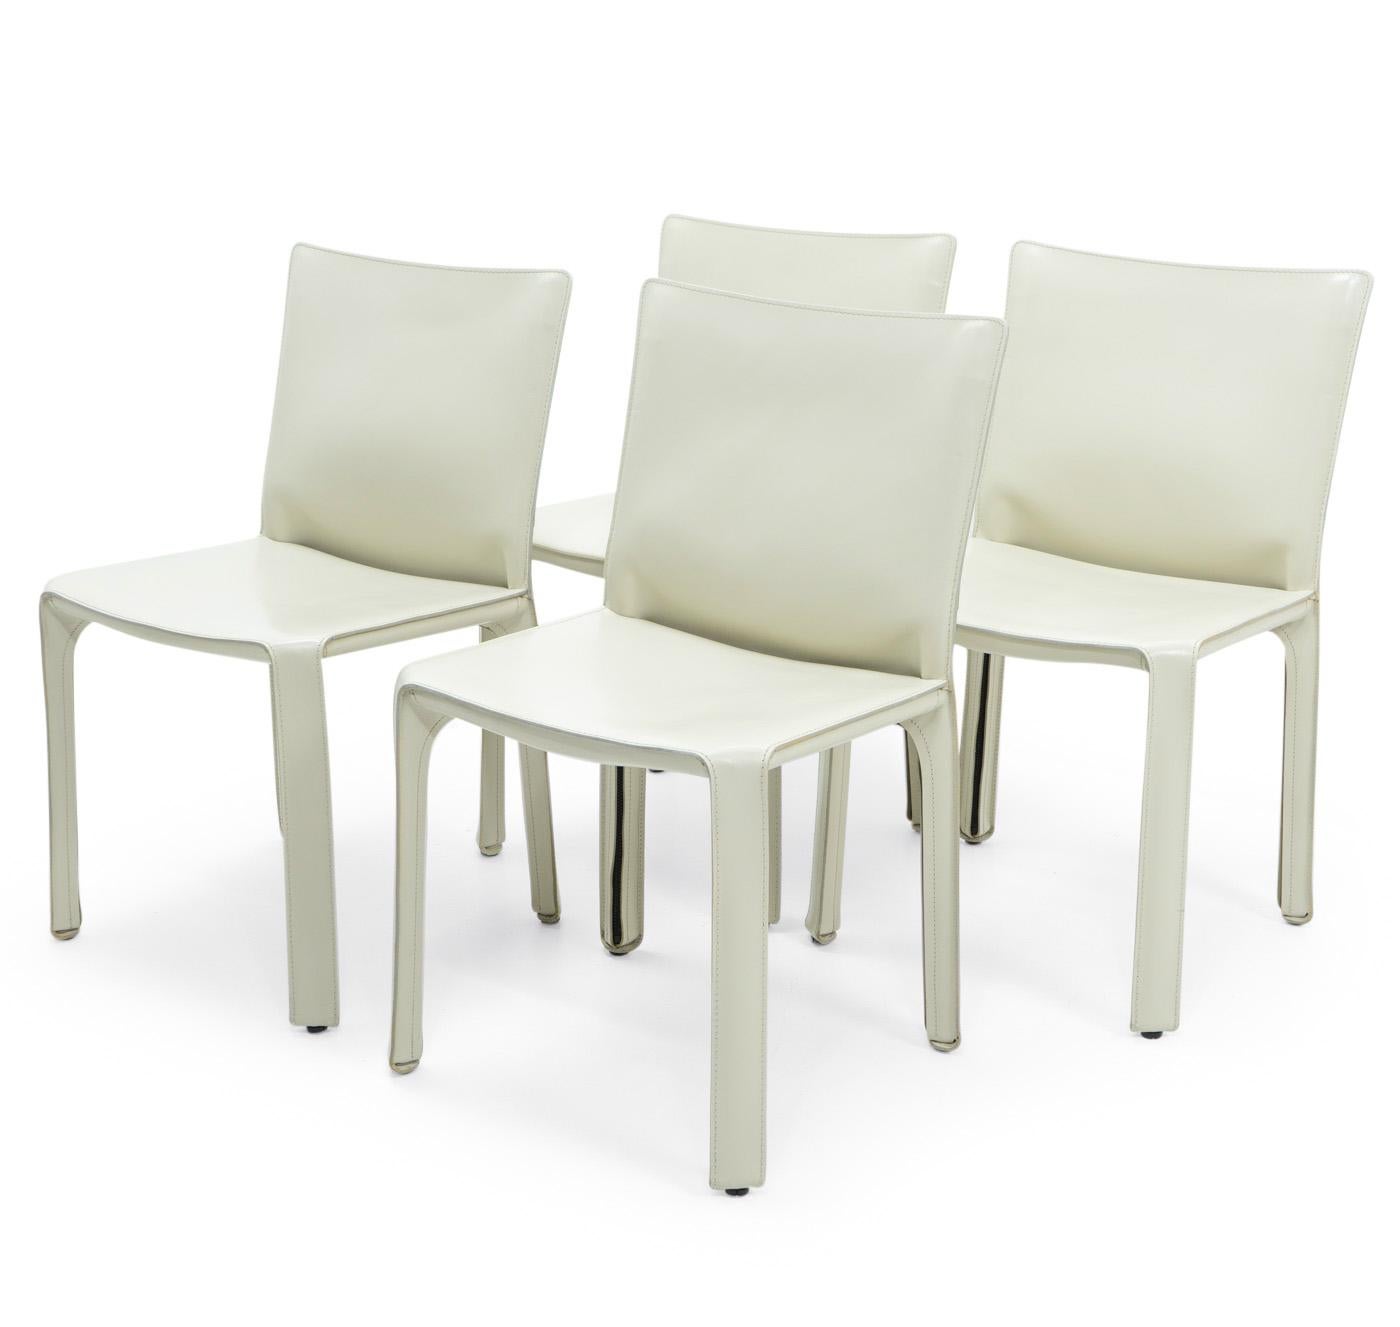 Cab 412 Chairs in Cream Leather by Mario Bellini for Cassina, Set of 4 In Good Condition For Sale In Renens, CH